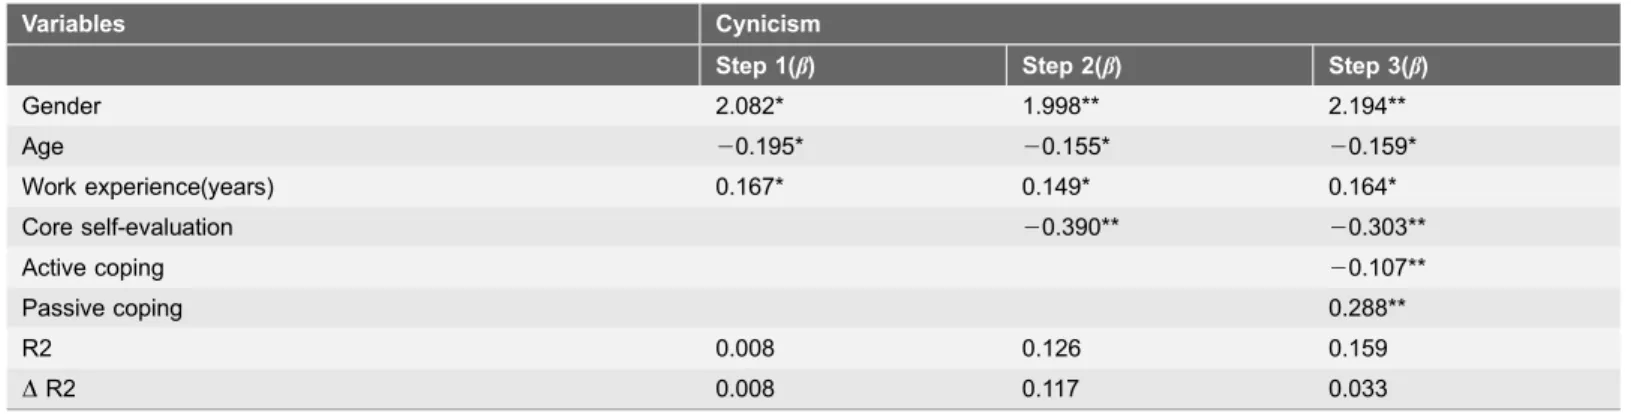 Table 4. Results of hierarchical linear regression analyses, with cynicism as the criterion variable.